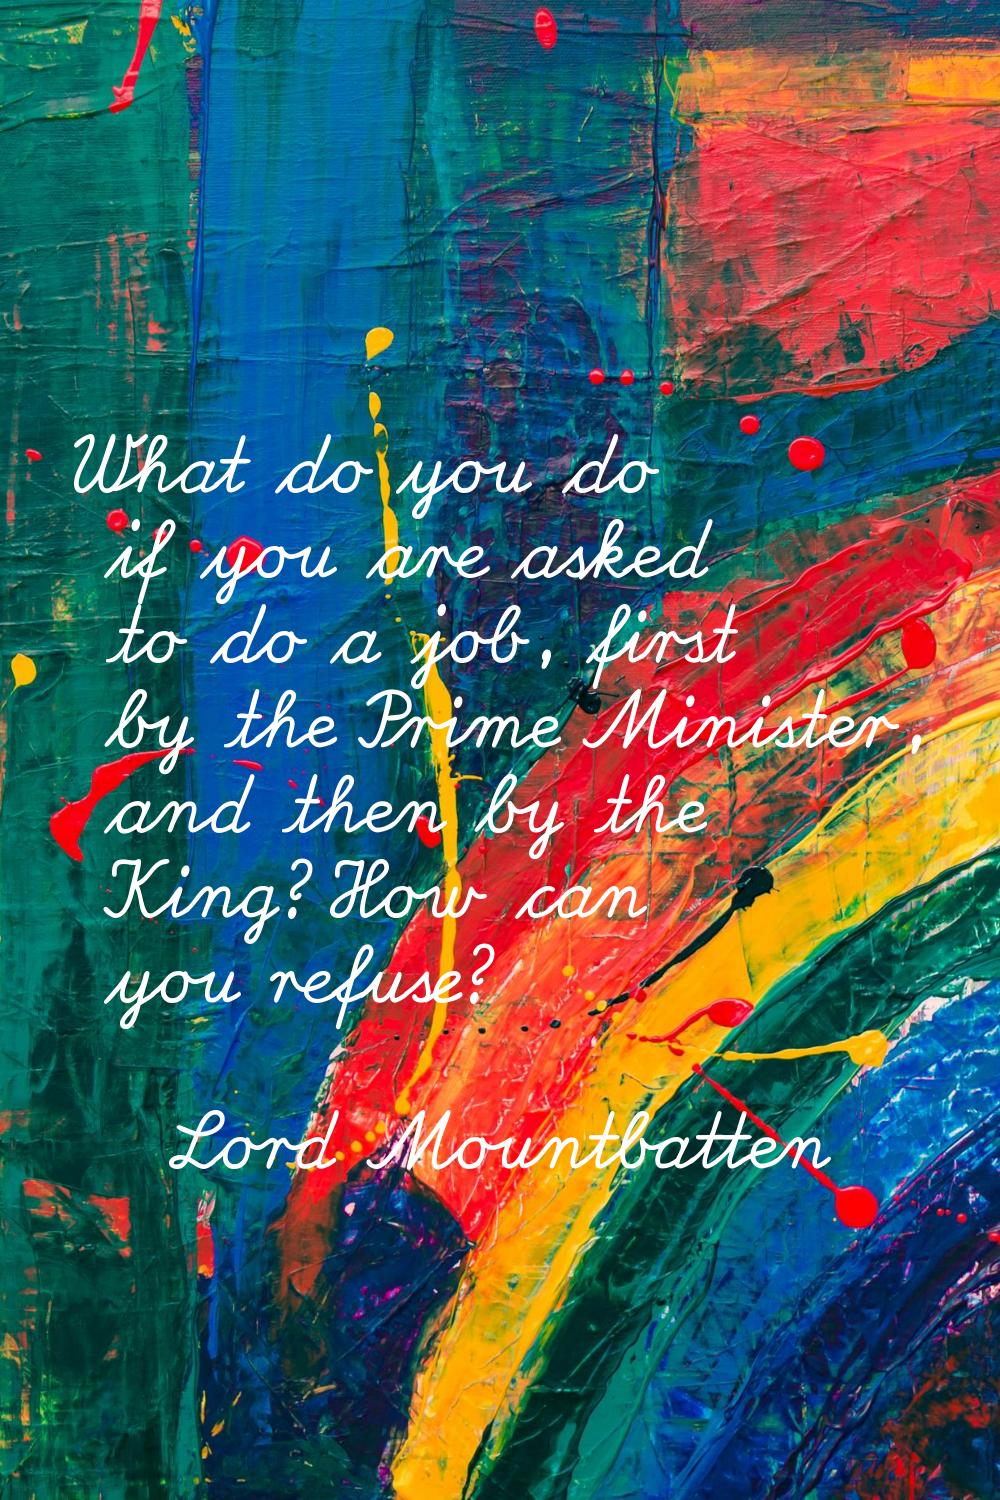 What do you do if you are asked to do a job, first by the Prime Minister, and then by the King? How